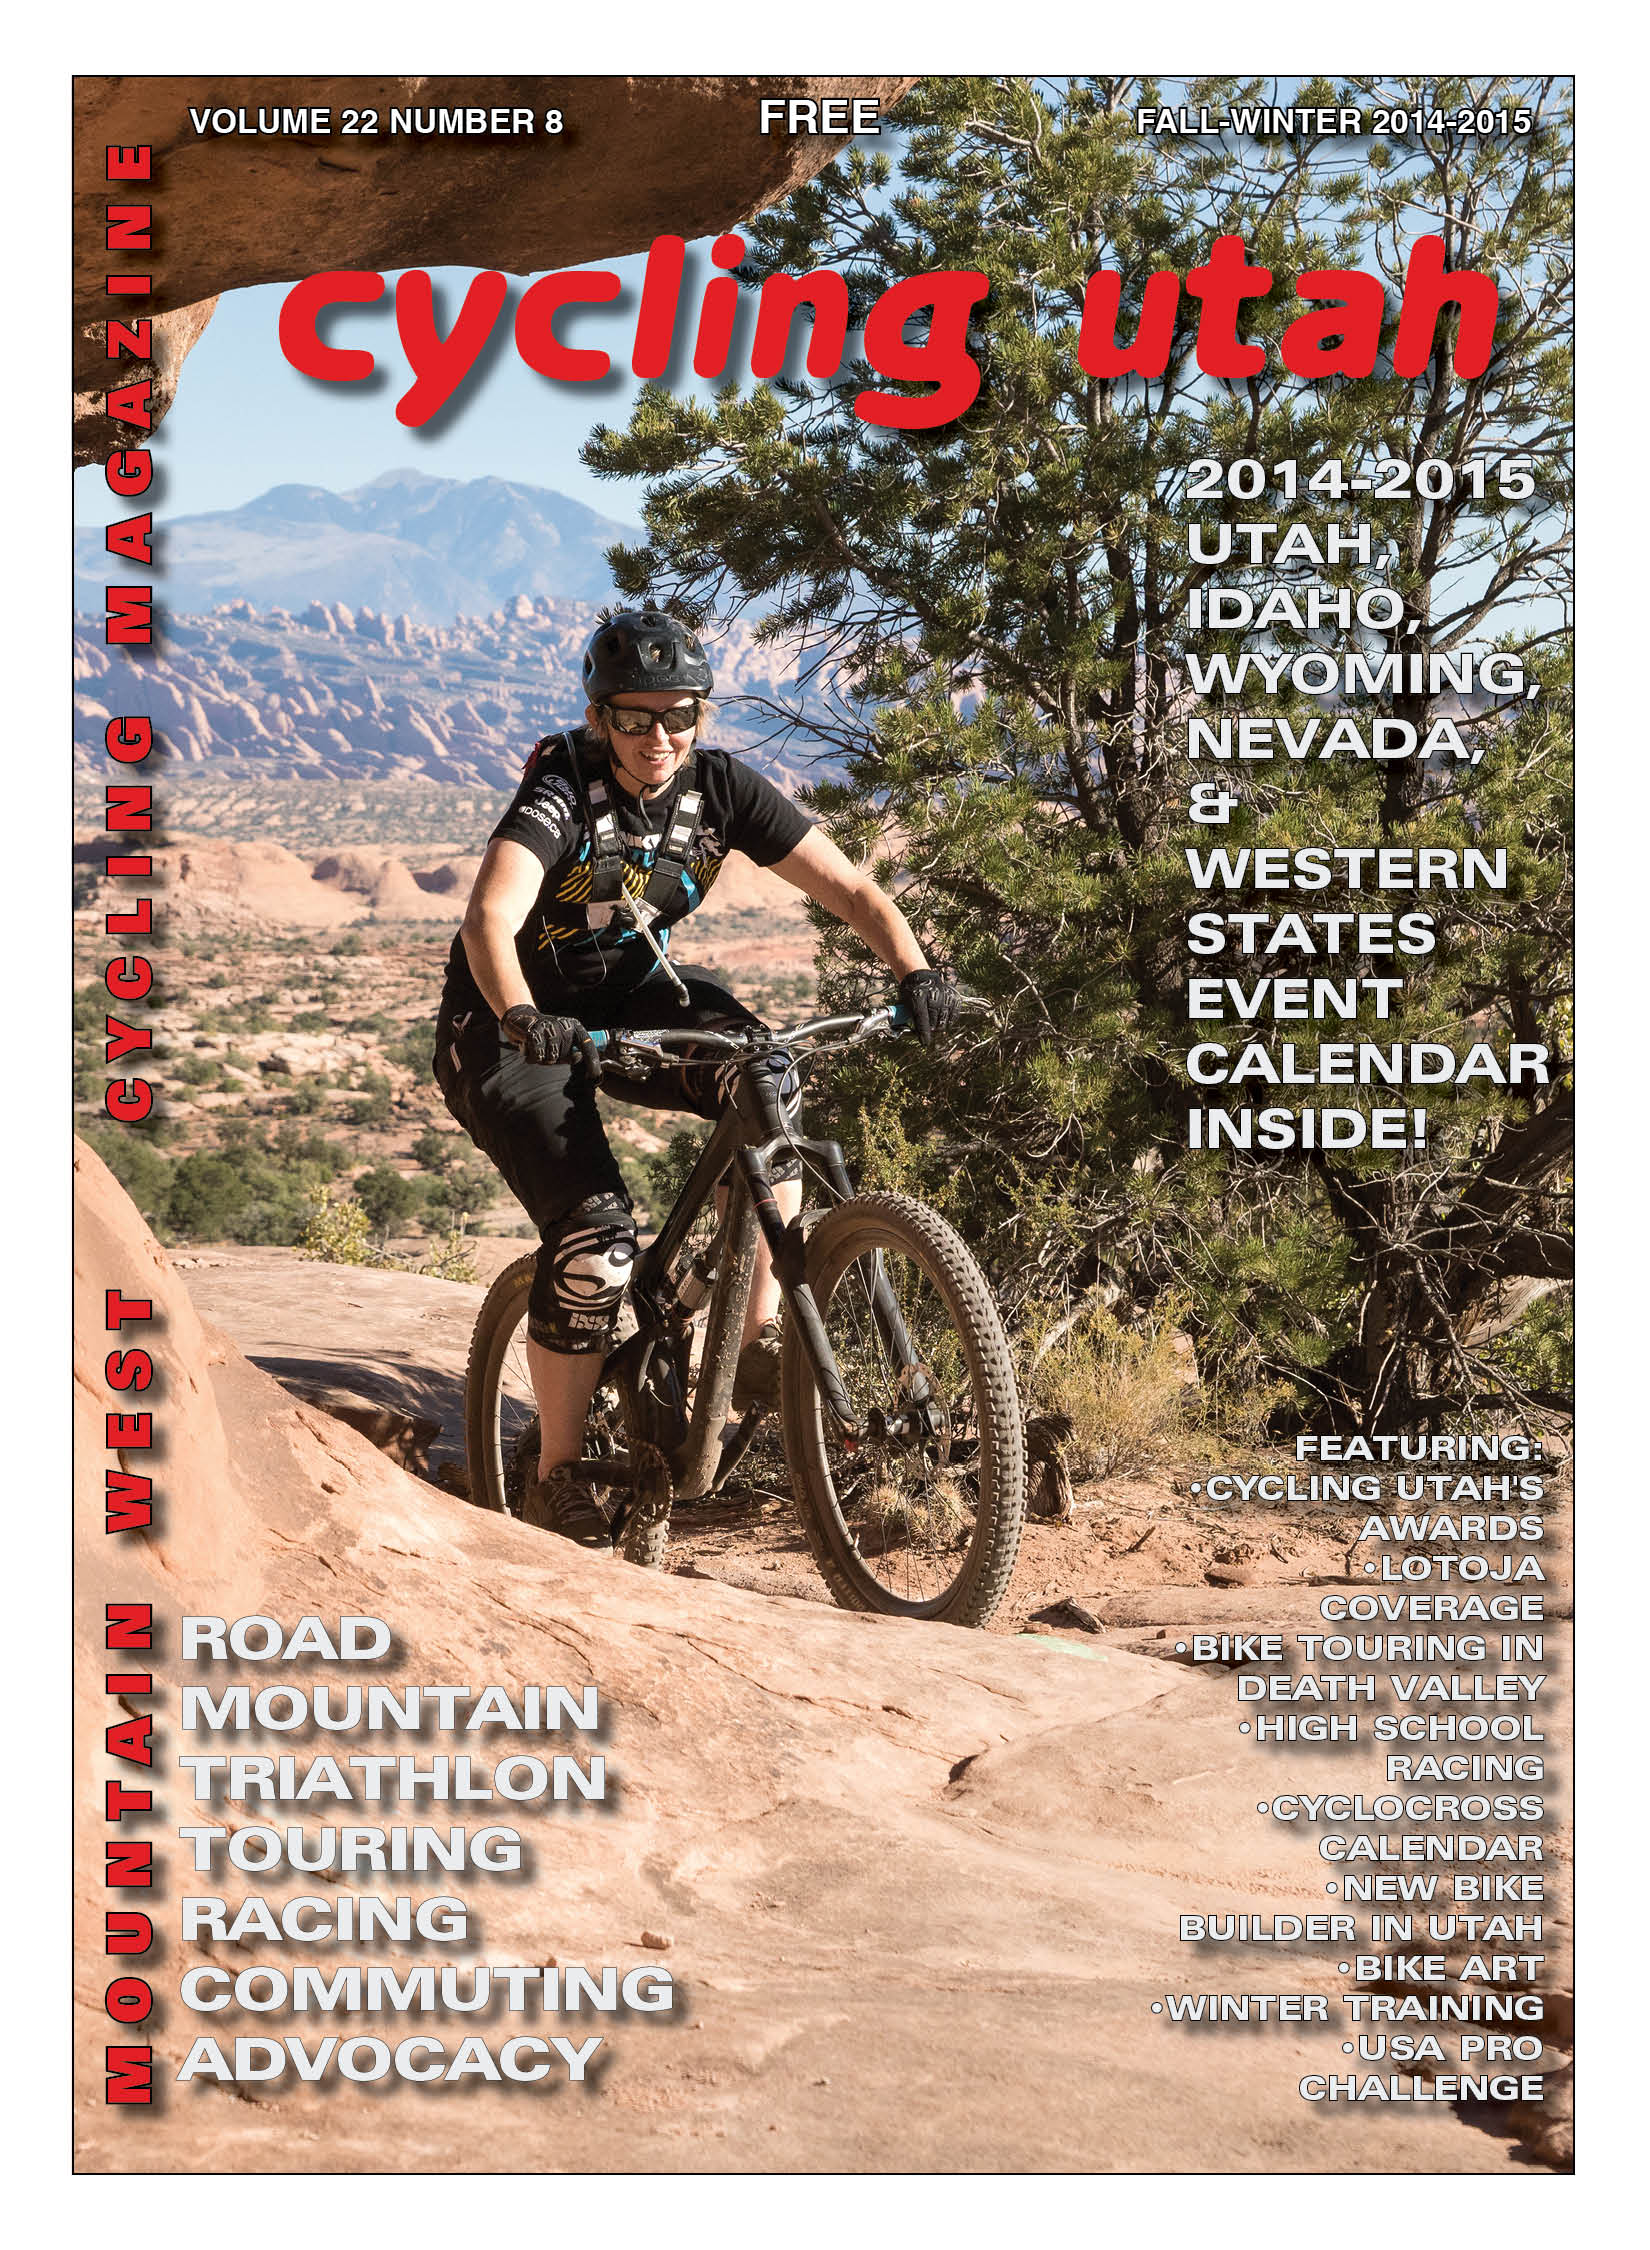 Cycling Utah’s Fall-Winter 2014-2015 Issue is Now Available!